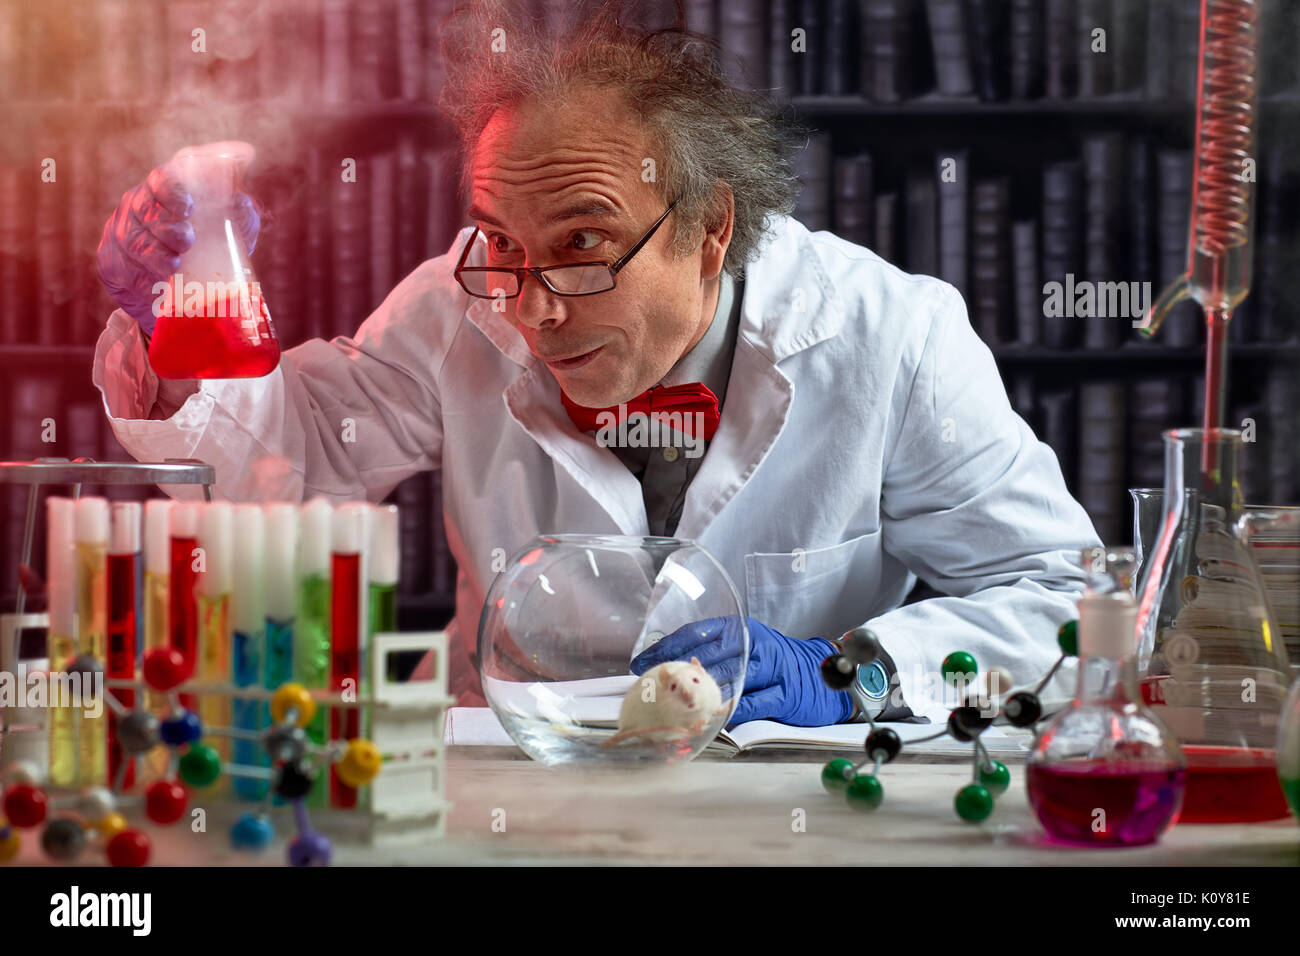 crazy scientist the making mix of chemicals to experiment on mouse Stock Photo